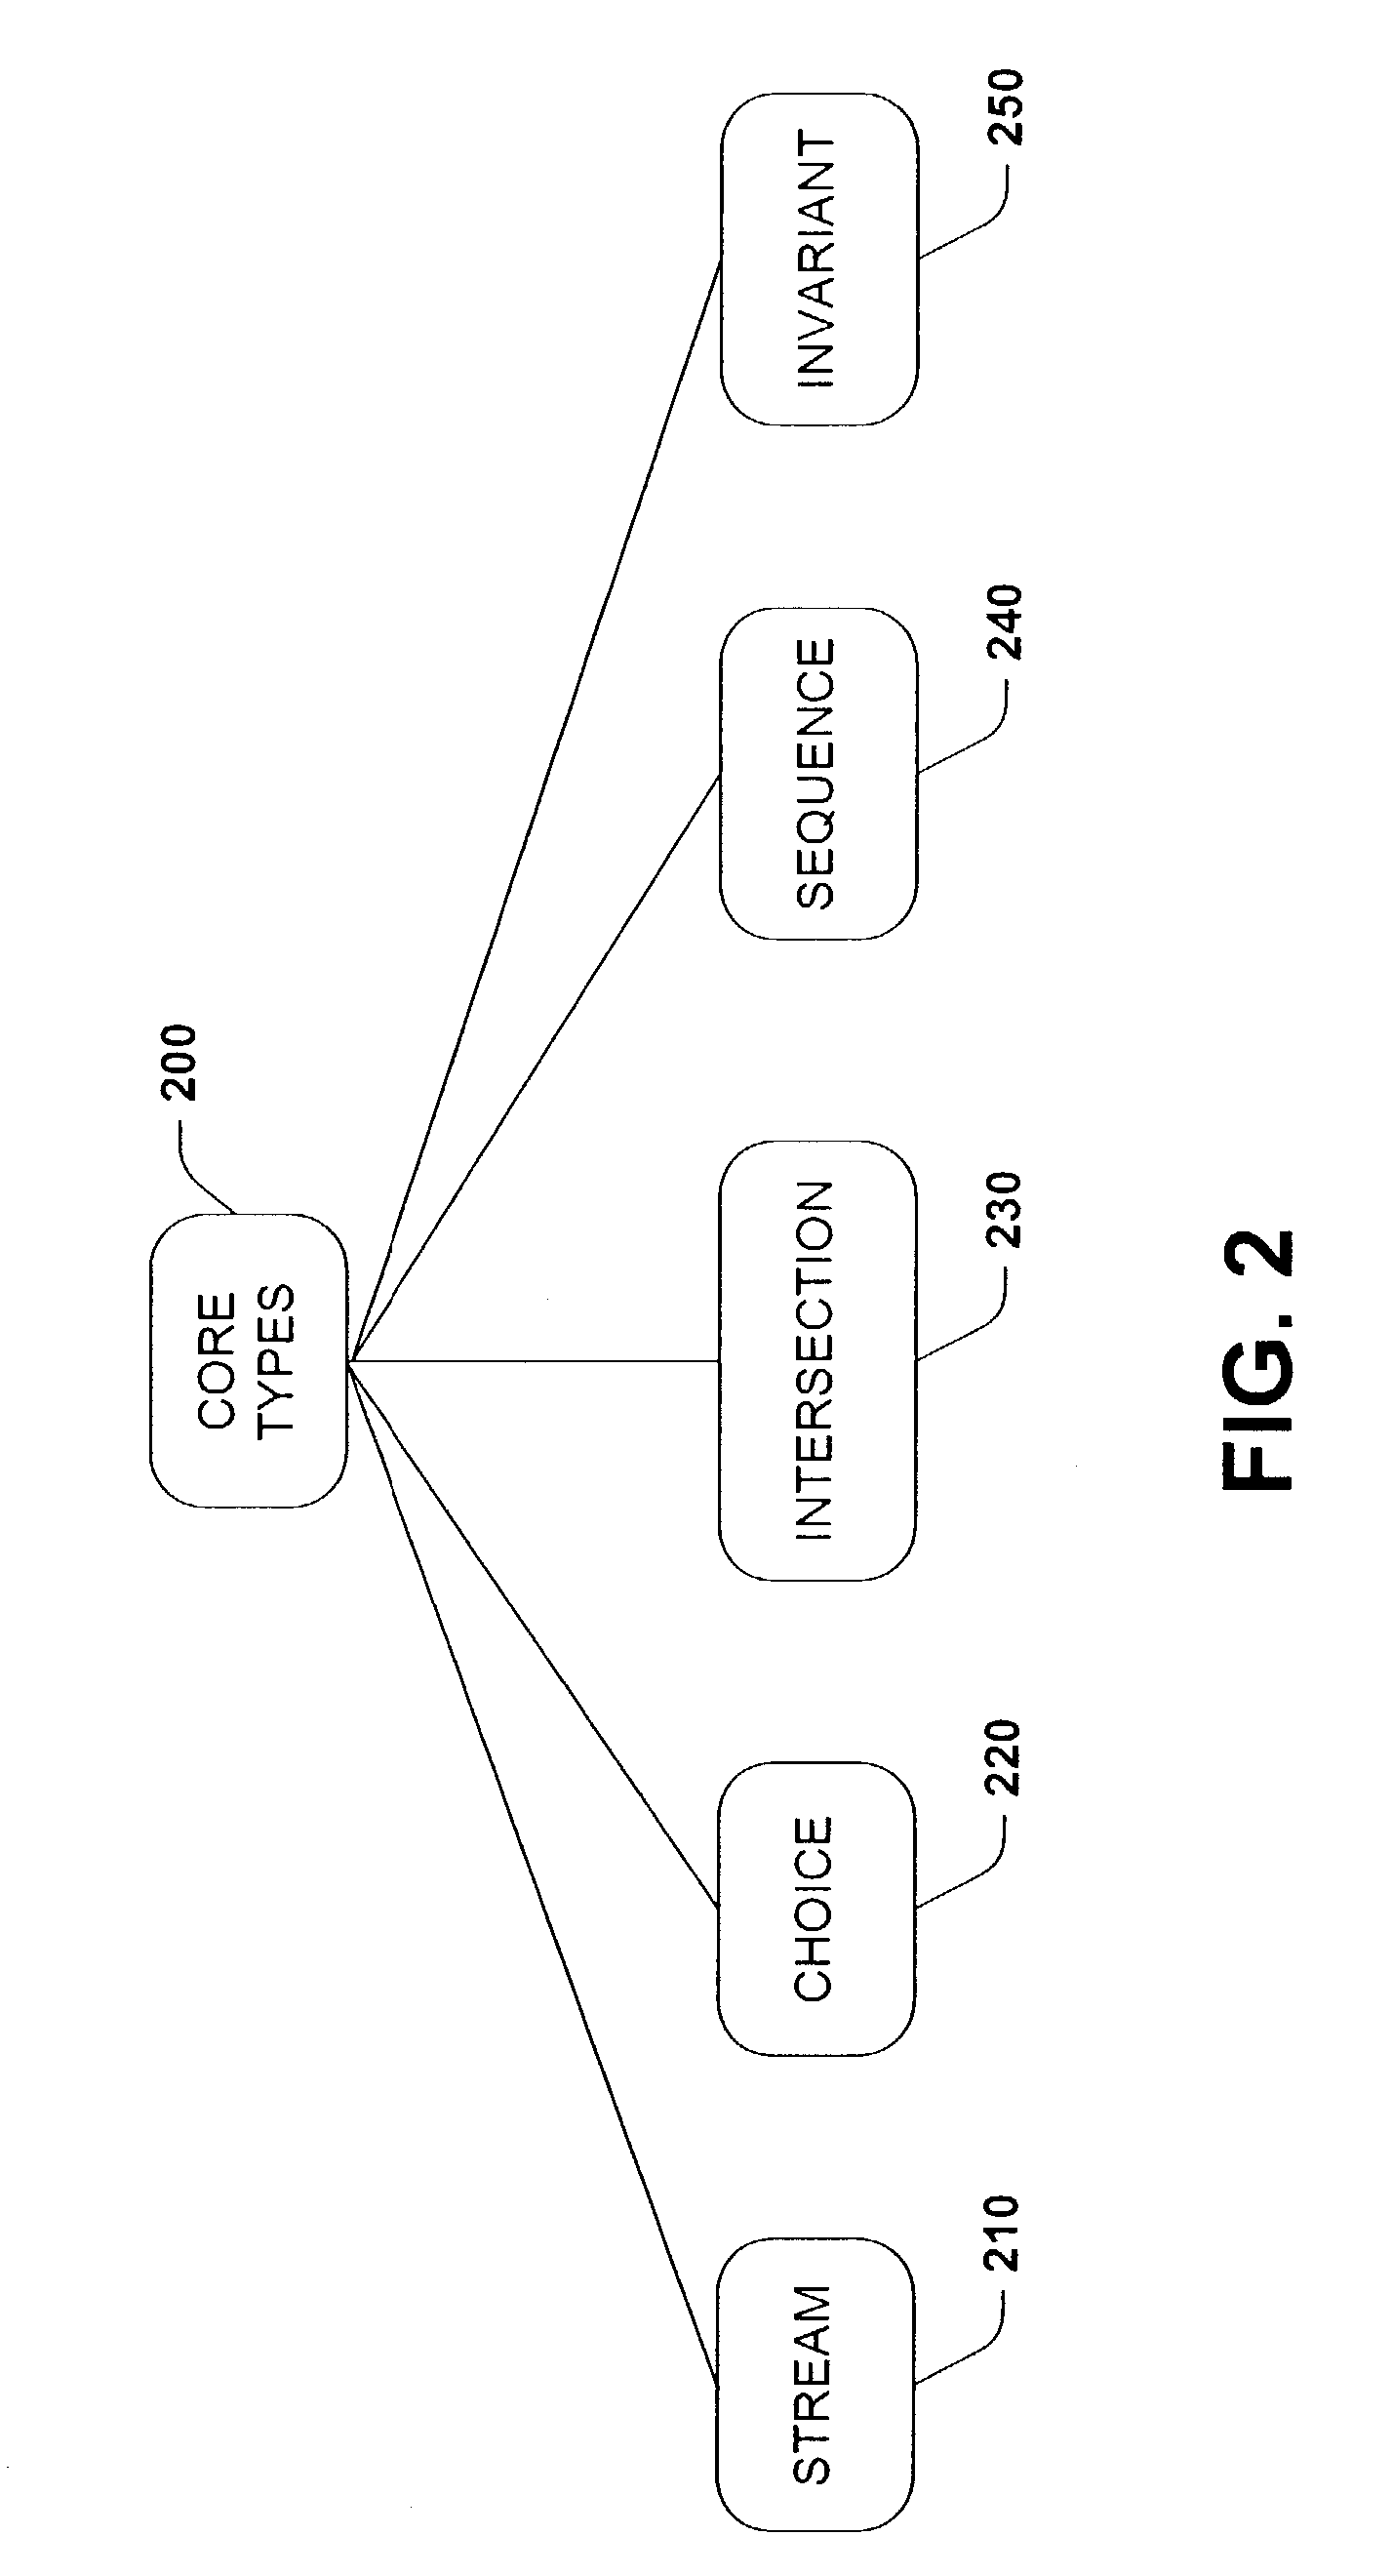 Core object-oriented type system for semi-structured data